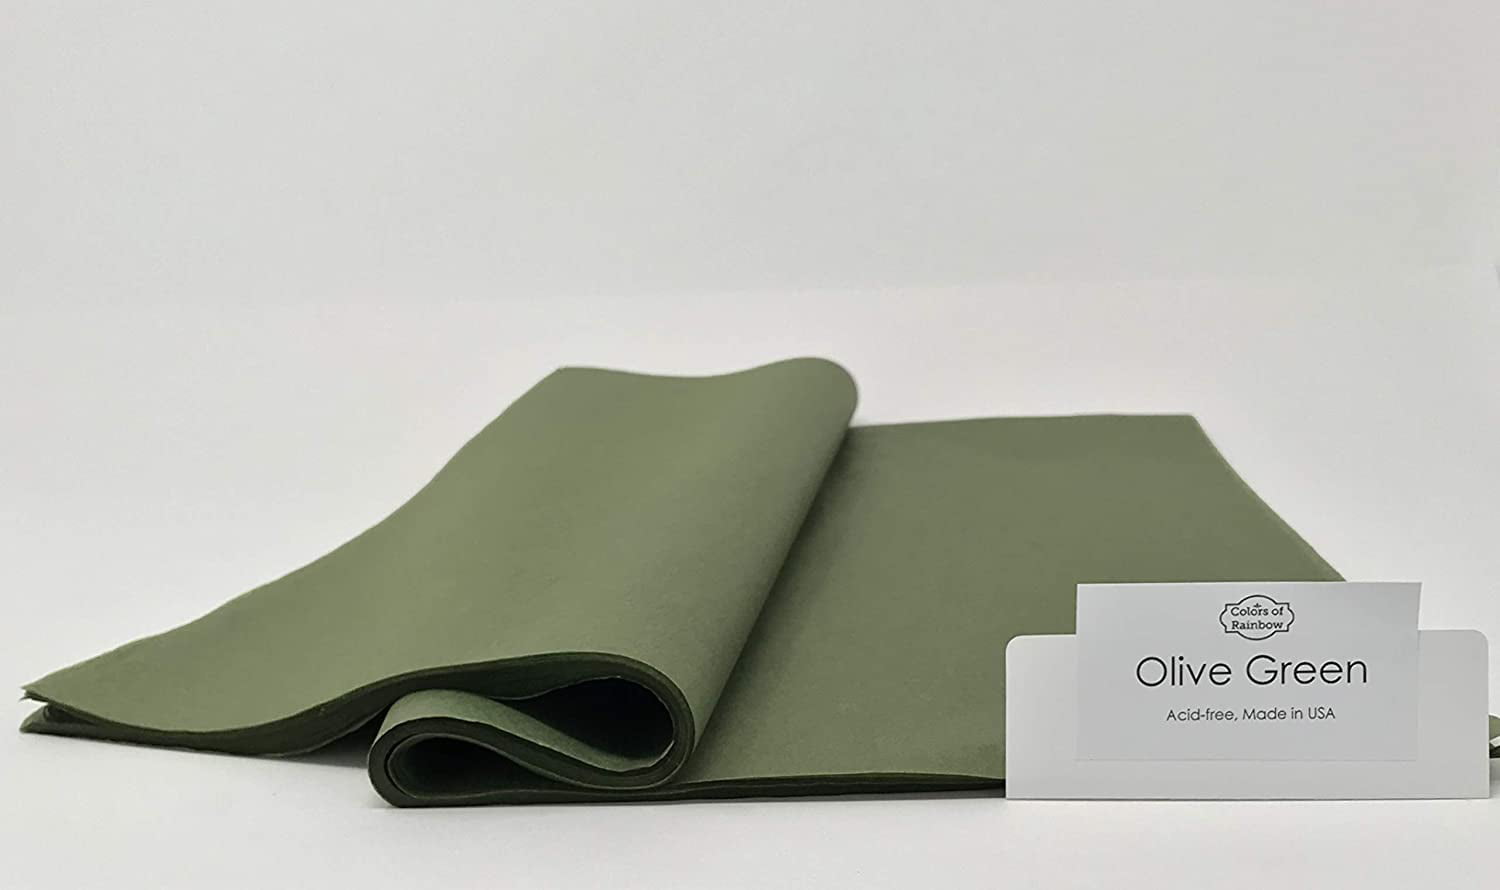 OLIVE GREEN Tissue Paper for Gift Wrapping 20"x26" Sheets Eco-Friendly 